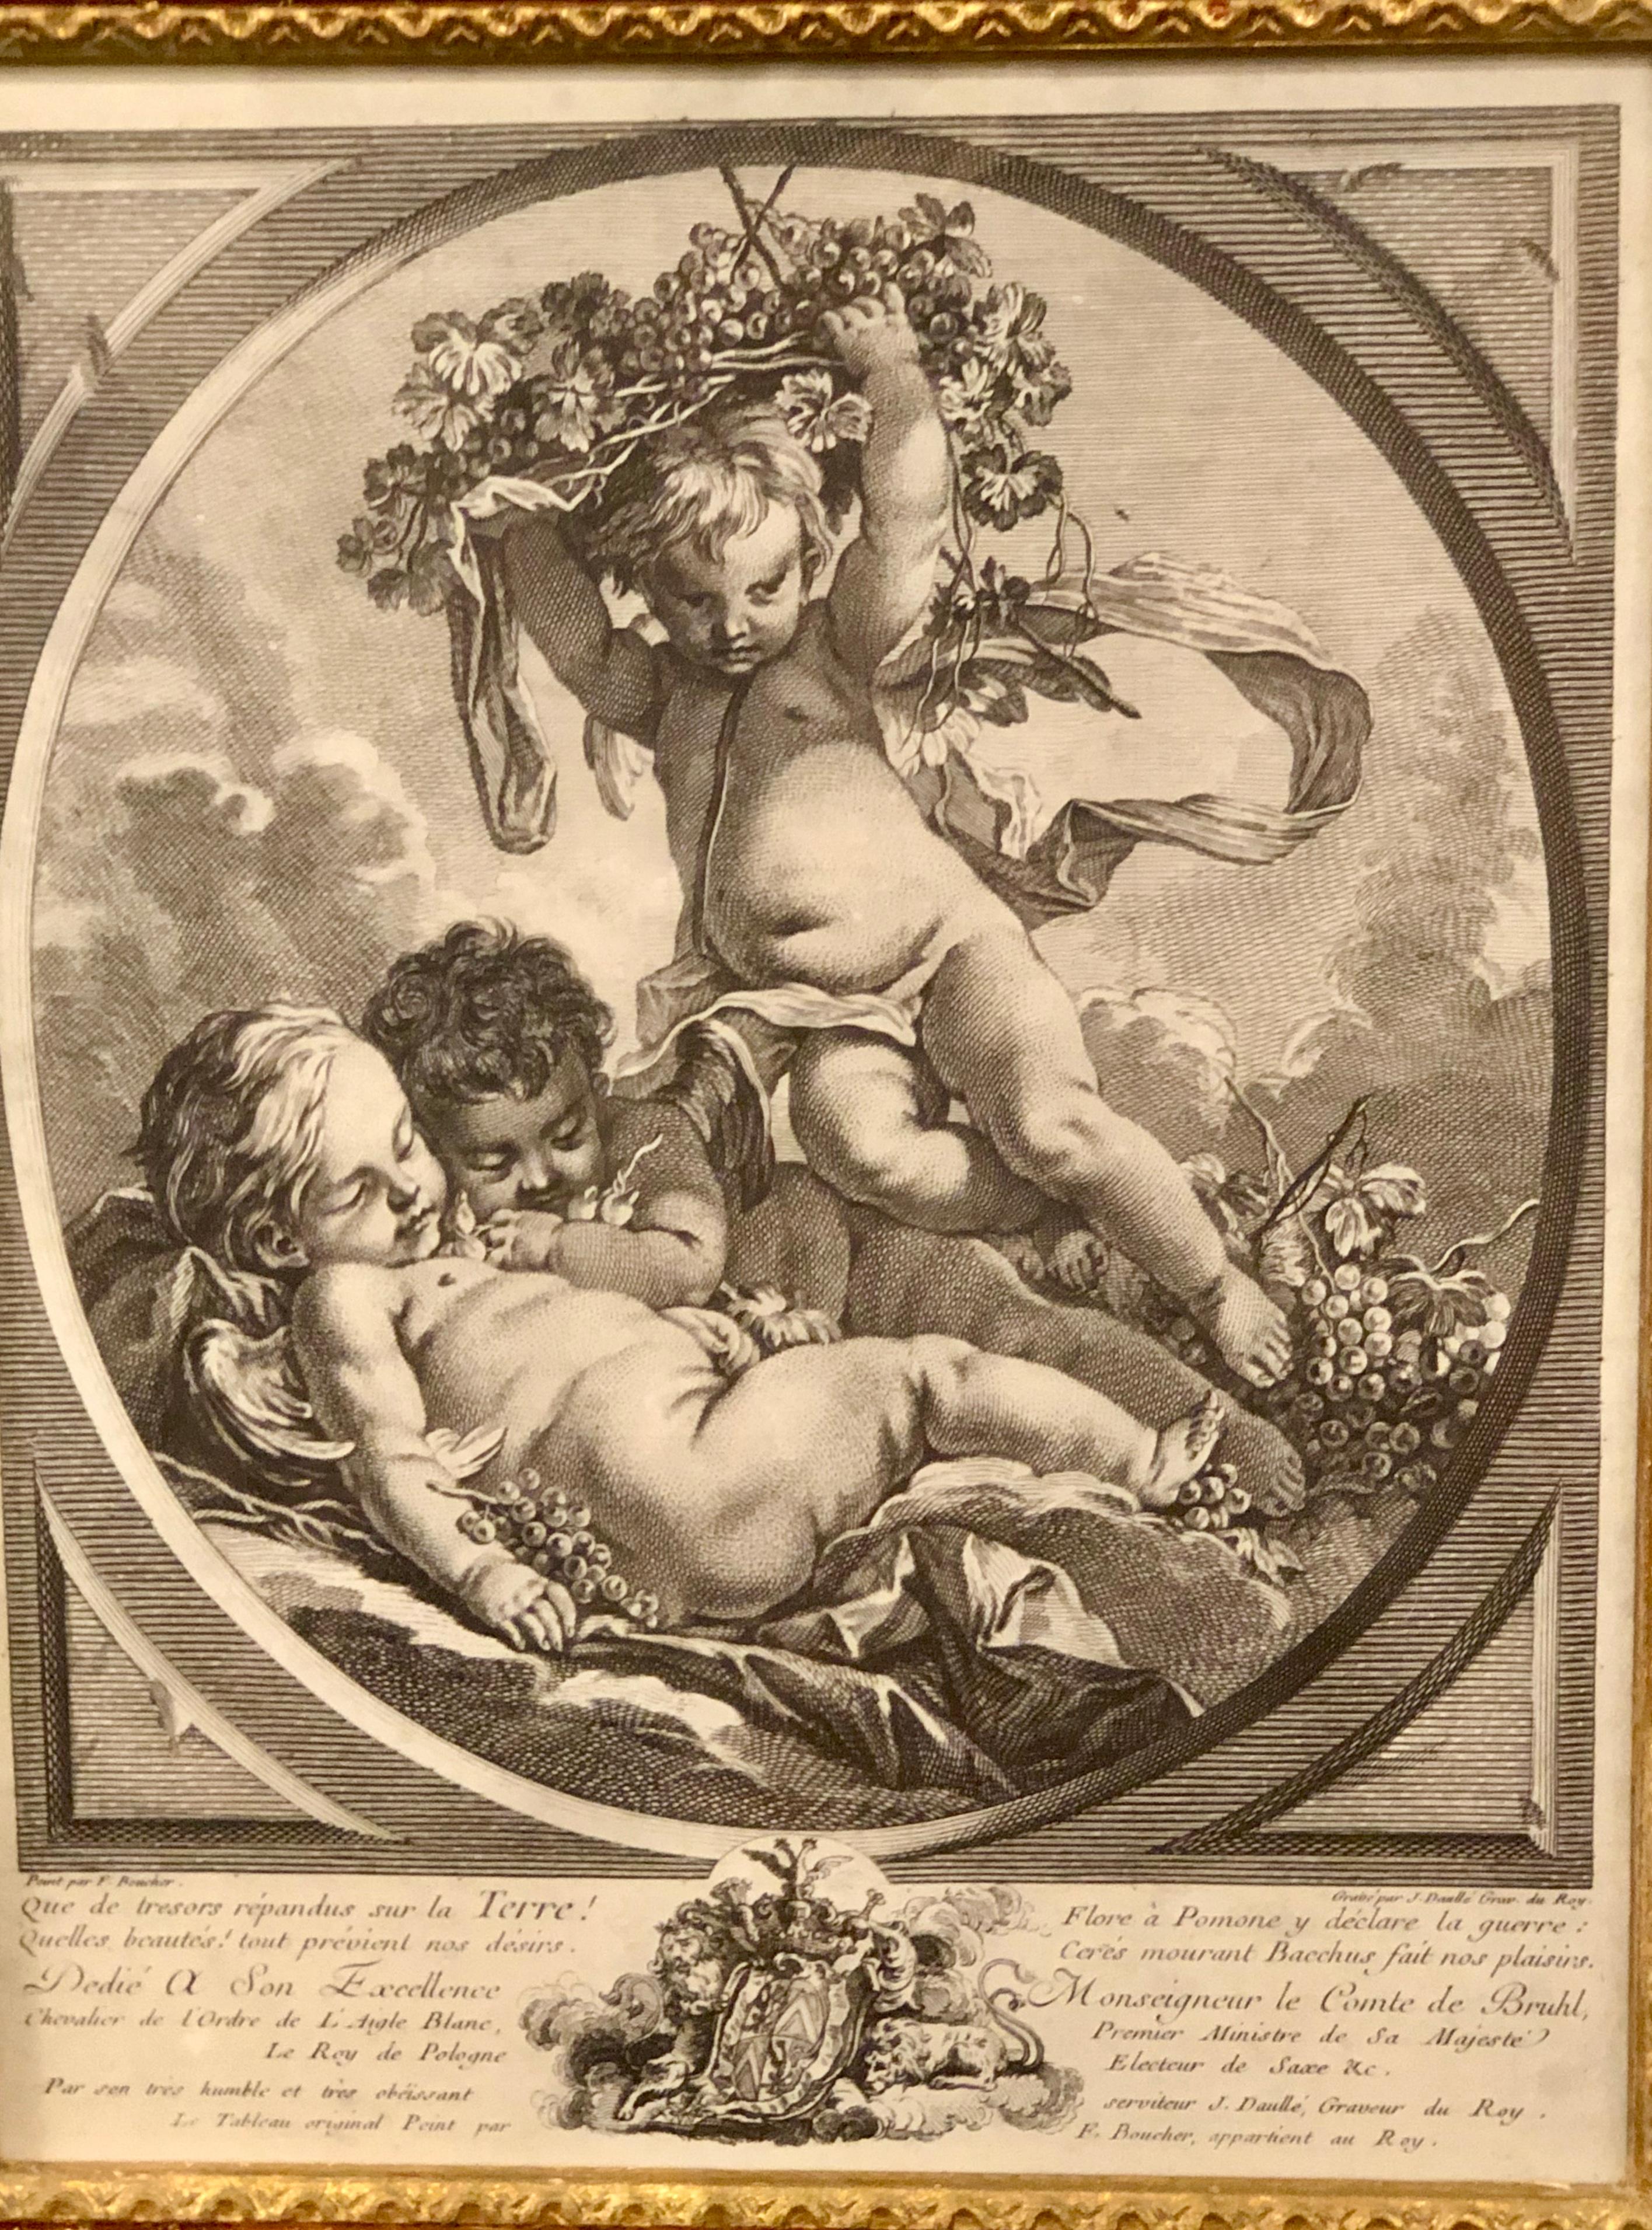 Four Framed Elements “Putti” Etchings after François Boucher’s 2